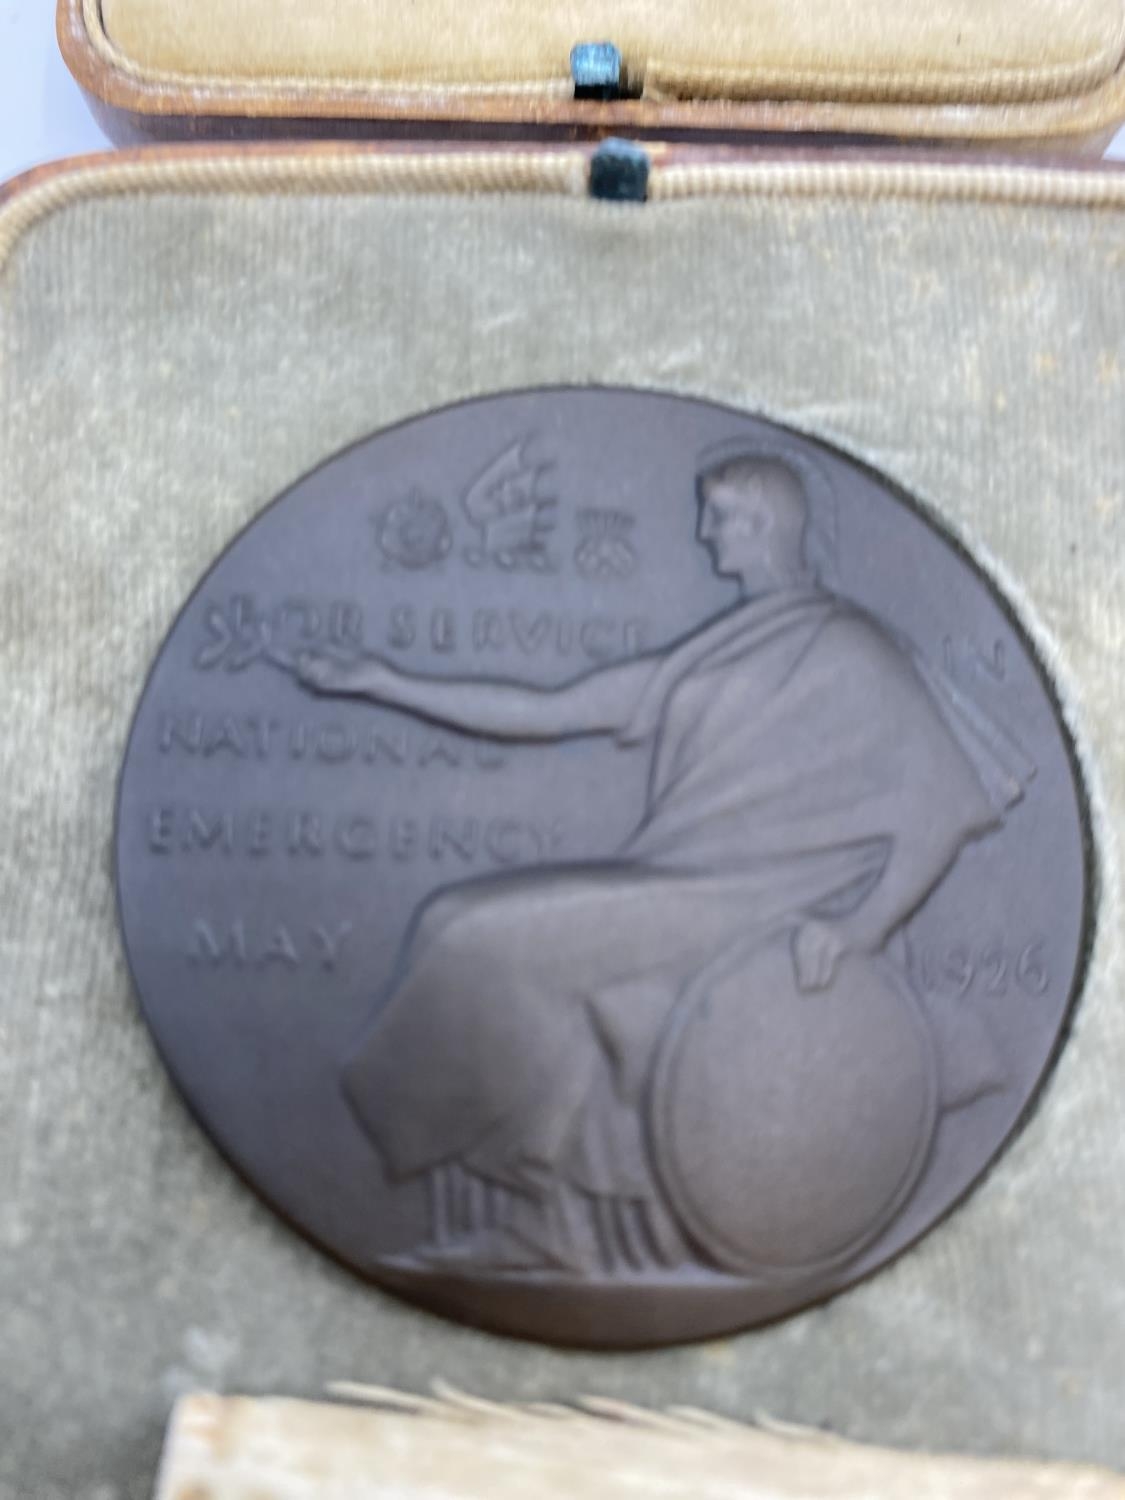 Two bronze medallions 'for service in national emergency' May 1926 London, Midland, Scottish, - Image 3 of 10